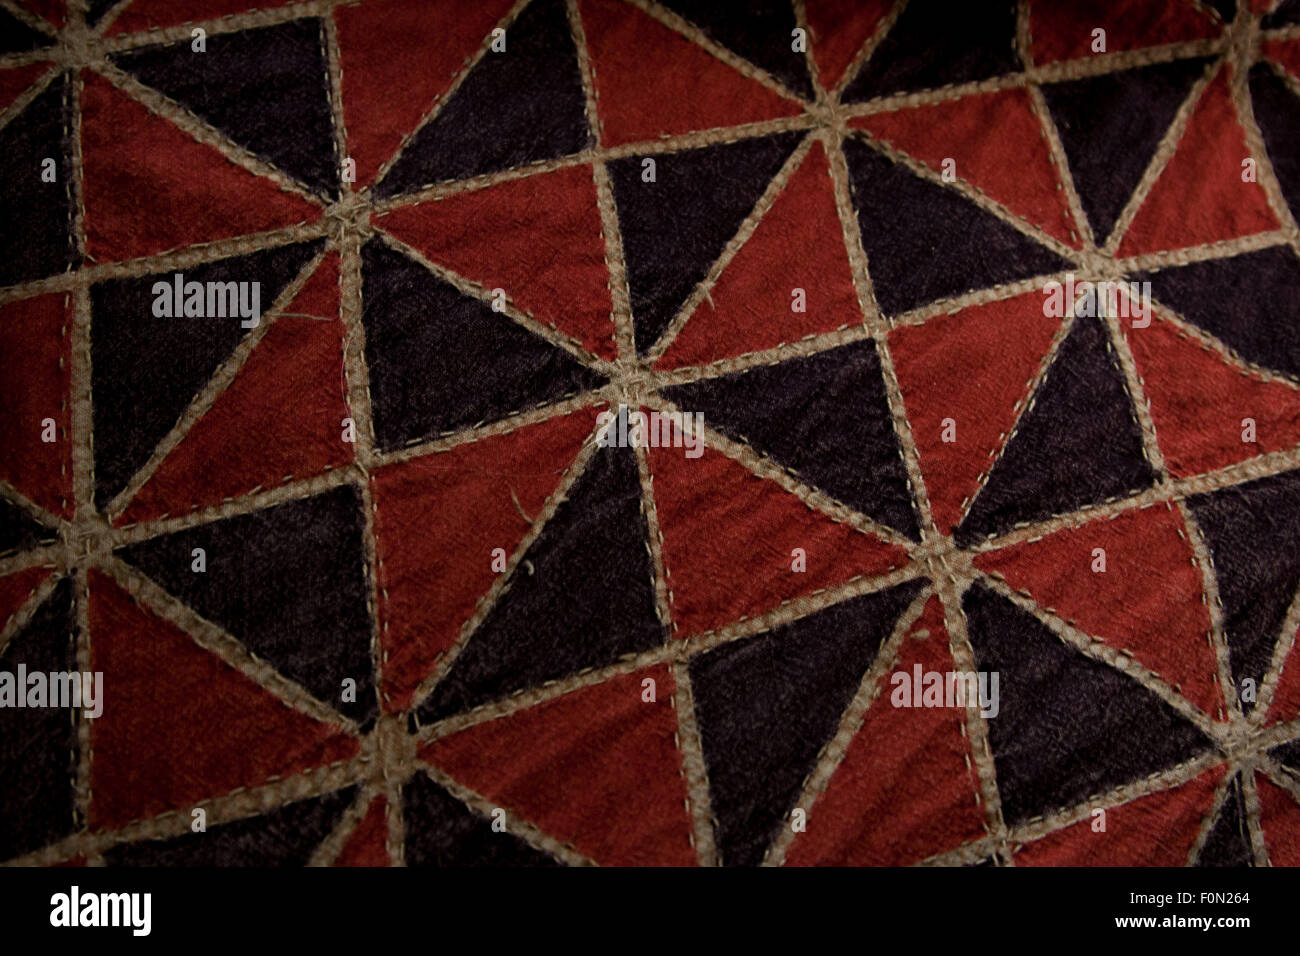 Pinwheel pattern in red and black on an Indian bedspread. Stock Photo